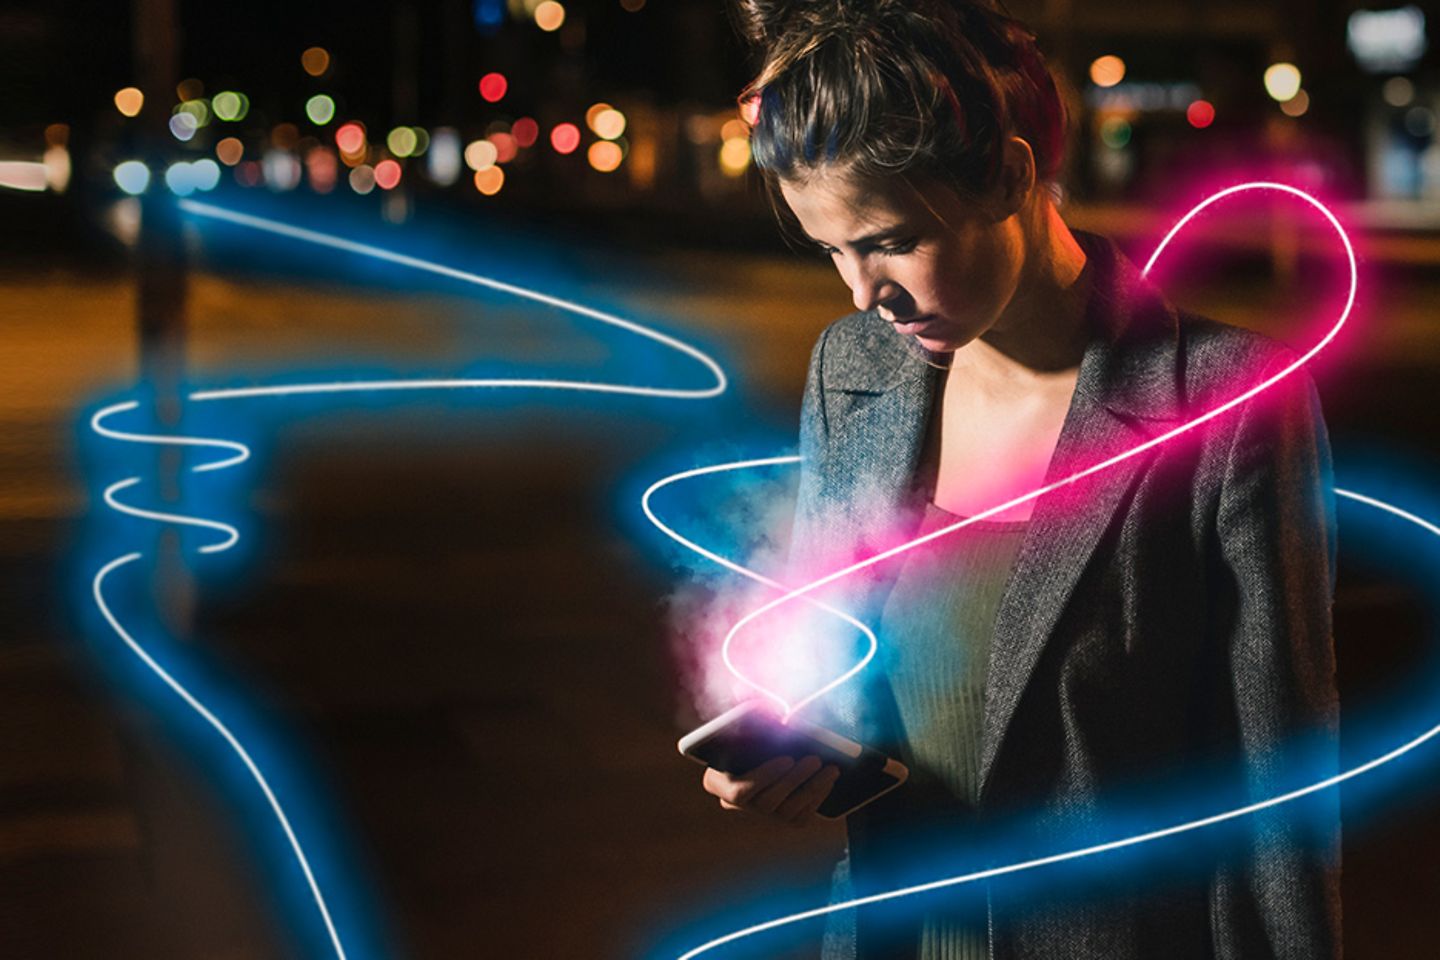 Woman stands on a nocturnal street and looks at her glowing smartphone. Pink and blue light lines surround her.